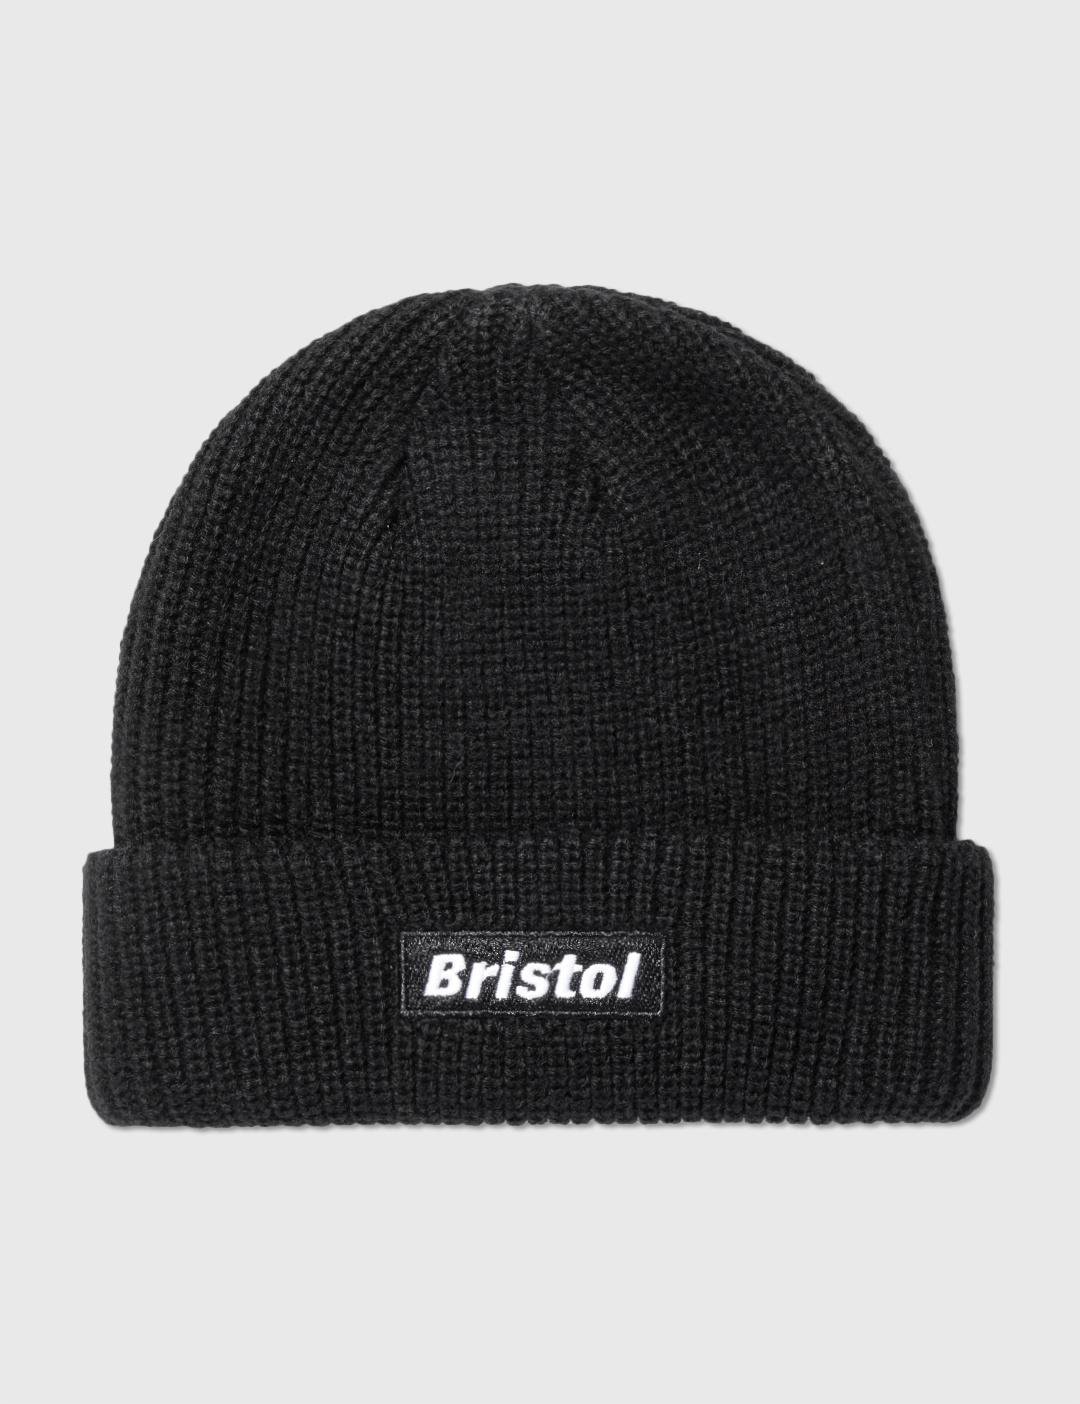 SMALL CLASSIC LOGO BEANIE by F.C. REAL BRISTOL